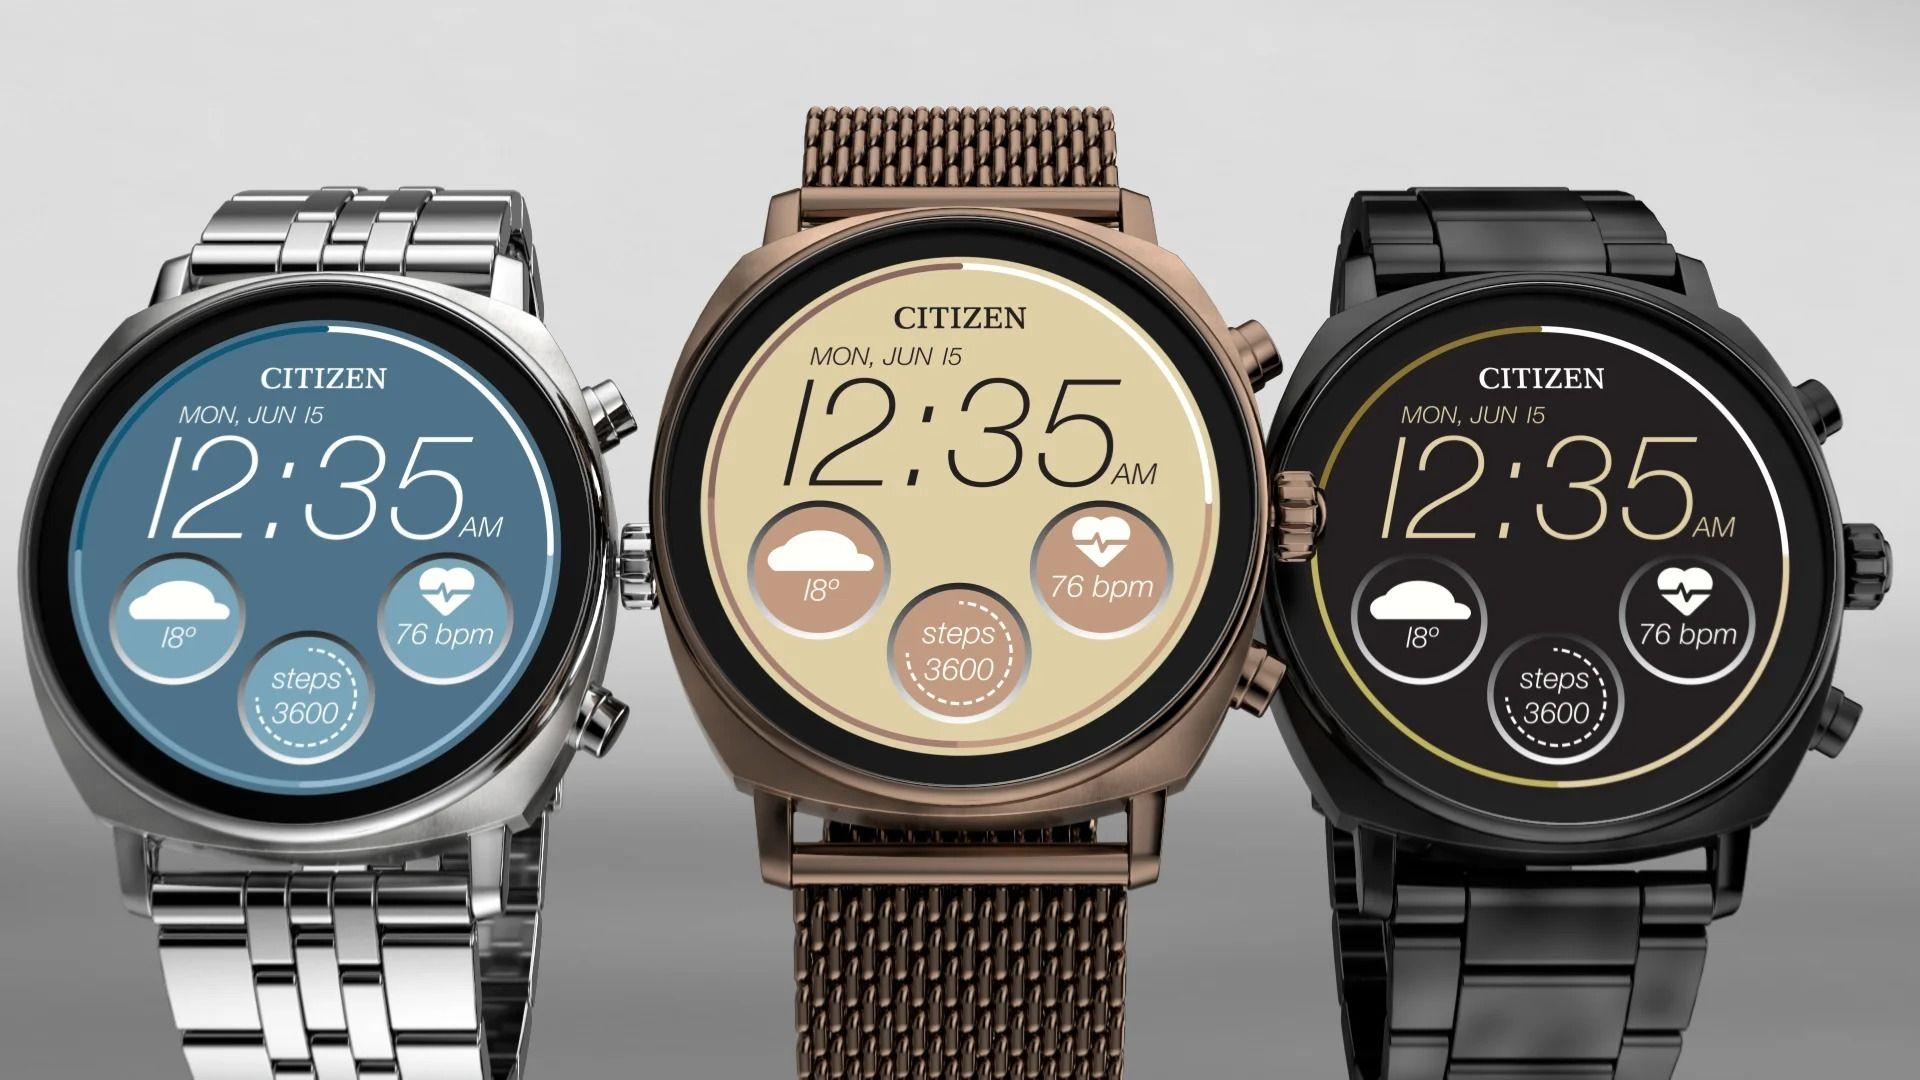 Citizen’s space technology smartwatch is finally available for preorder